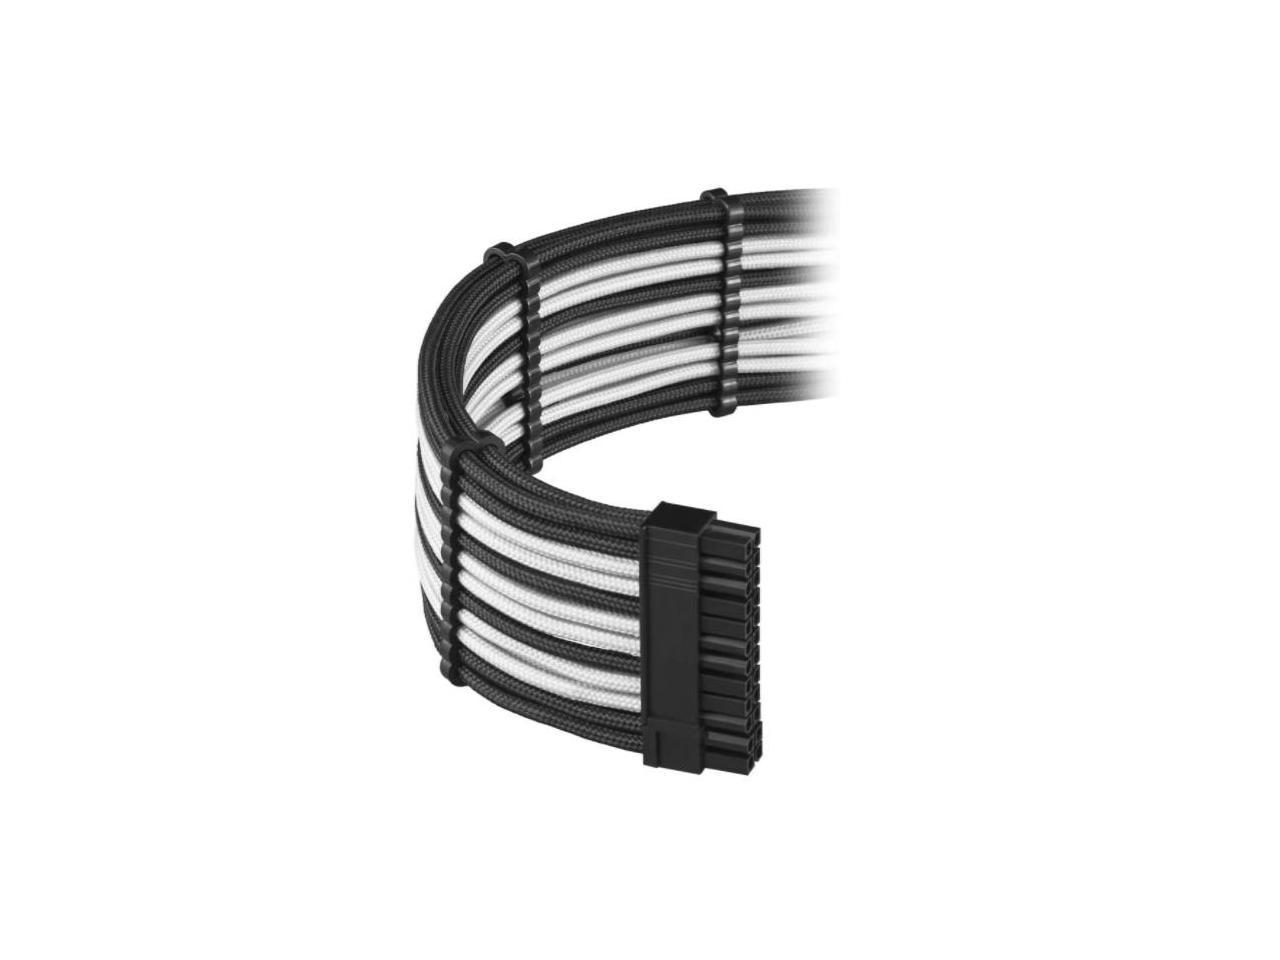 CableMod RT-Series PRO ModFlex Cable Kit for ASUS and Seasonic -  Black/White [cm-PRTS-FKIT-KKW-R]